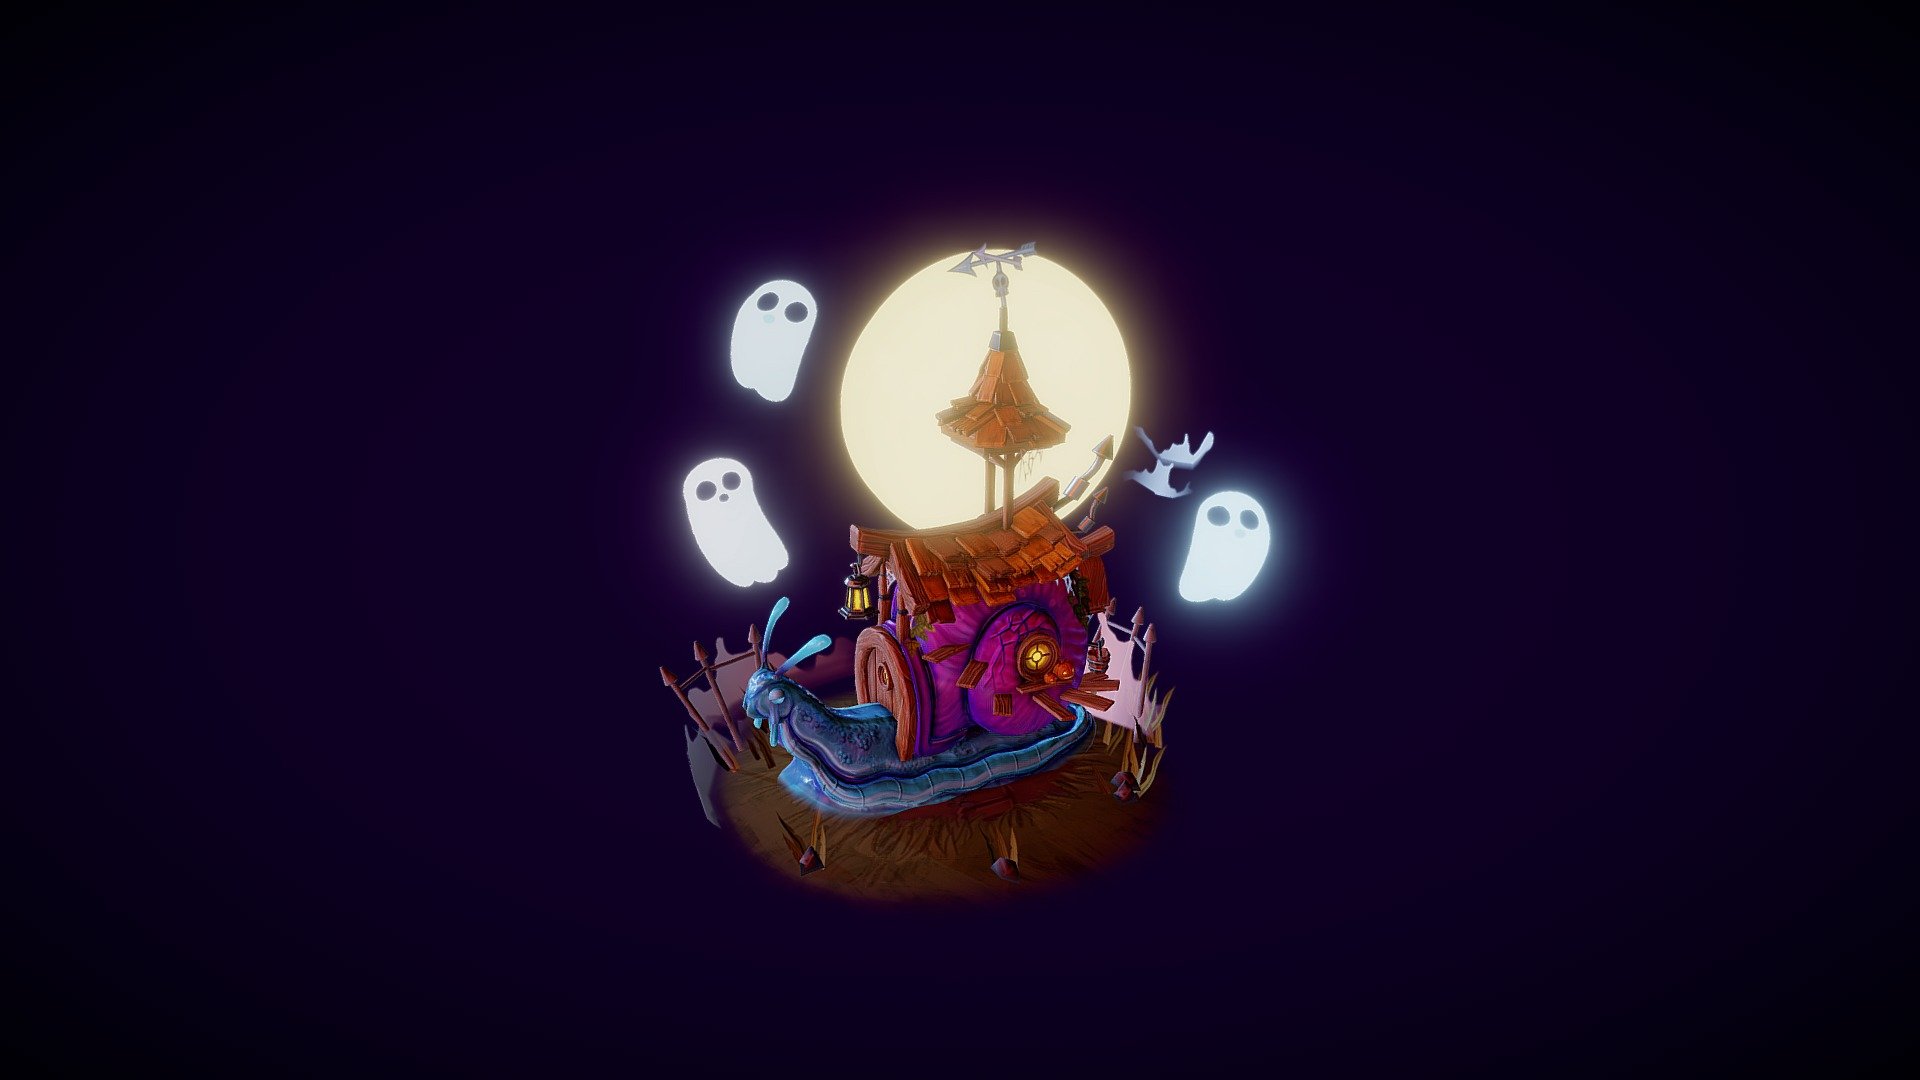 The ghost of a snail, brought back from the dead by the fabled necromouser to haunt it's own shell - makes for some great real estate! 


Here is my submission for the 2020 Haunted House challenge! I drew the concept for this myself, linked below ![https://twitter.com/maddilr/status/1320732158663839745/photo/1]

A little sad that that the lil mouse necromancer (Necro-mouser?) sadly didn't make the final model, but I'll definitely be updating this asset with him in!

Despite having a nightmare (aka losing all my texturing the night before!) I tried to work through it and still get my submission done in time, and I’m really pleased with the results! This was an area I wasn’t very confident in (sculpting especially) and so I’ve learnt tons this last week! I’m hoping to be more involved in future challenges as I enjoyed this one tons!

Music is from https://www.purple-planet.com/! &lt;3 - The Haunted Snouse! Haunted House Challenge - 3D model by Madison Riley (@maddilriley) 3d model